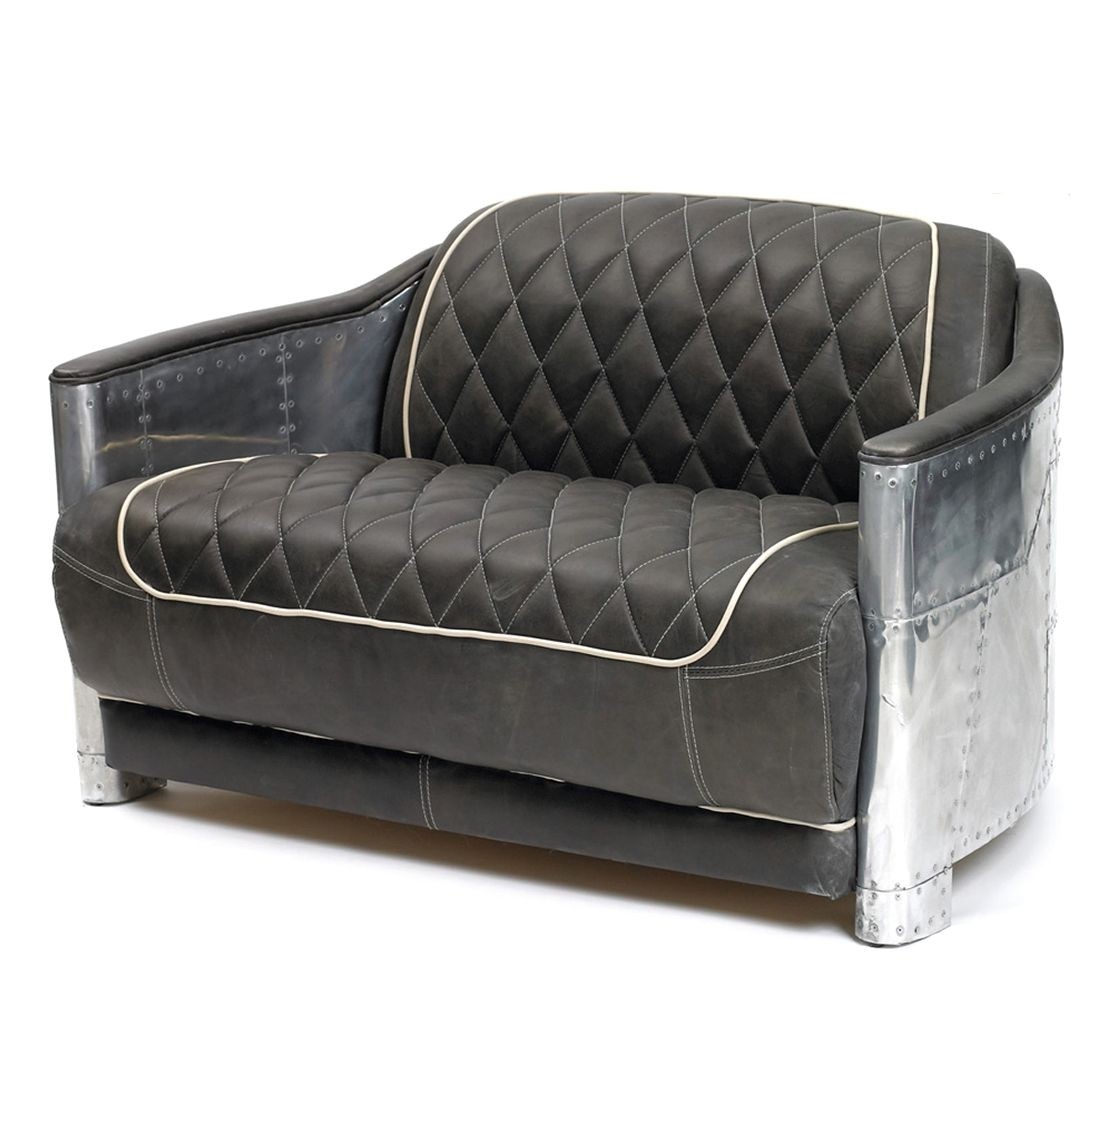 Hipster riveted metal aviator tufted leather sofa chair